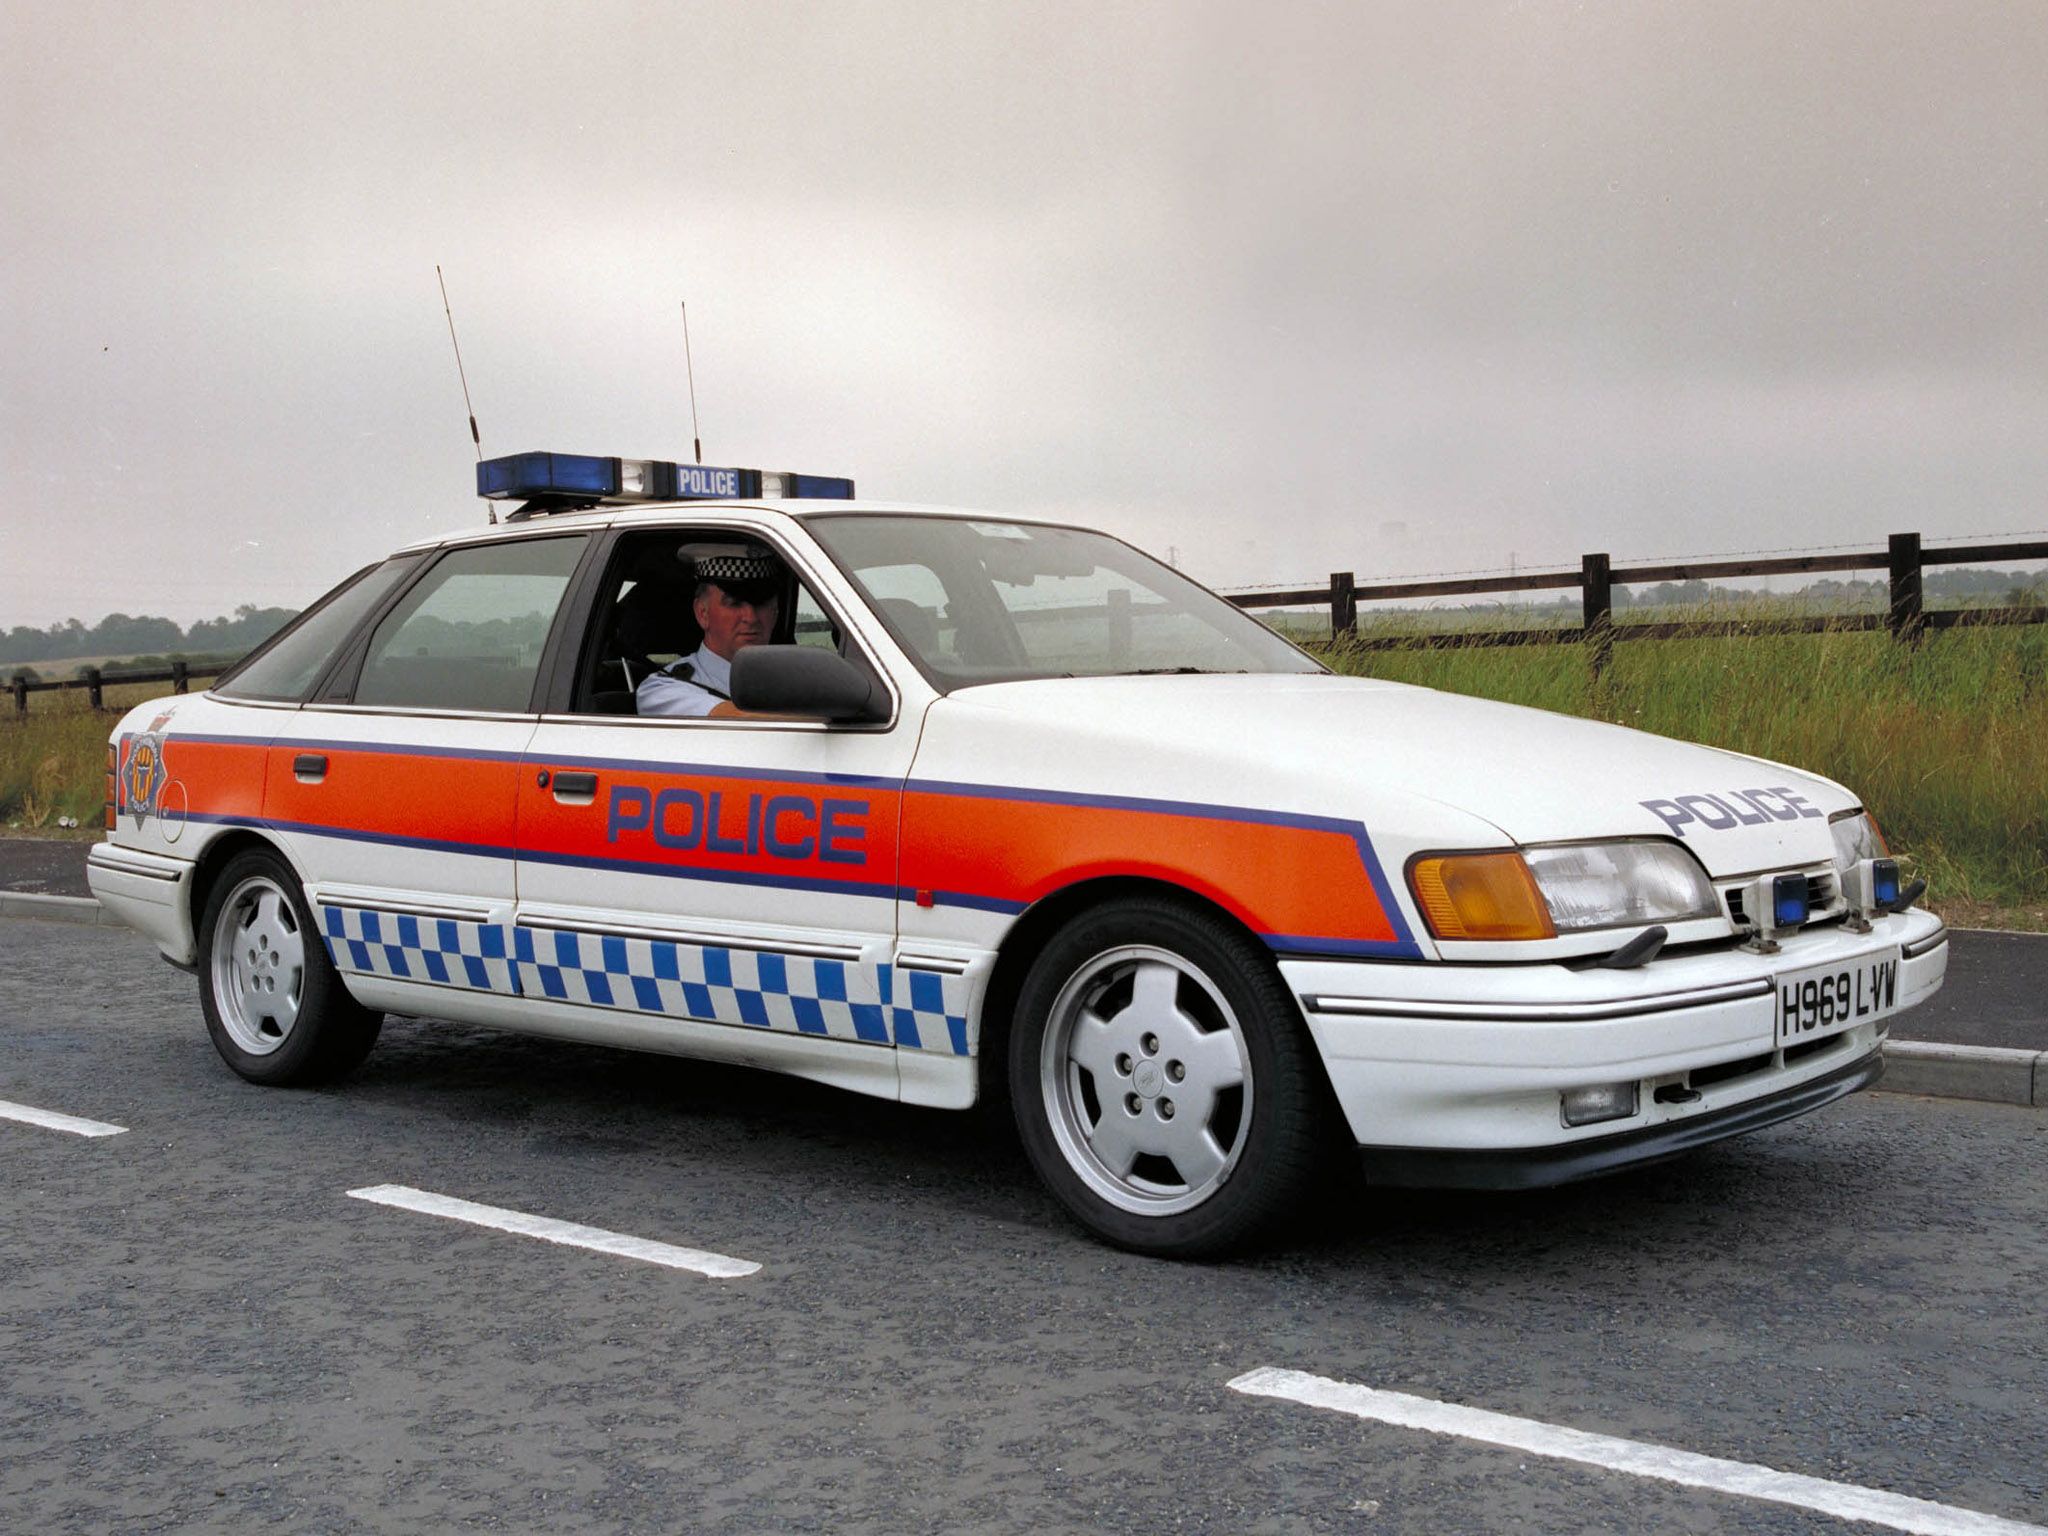 Ford Scorpio Police Car. Police cars, Vehicles, Police